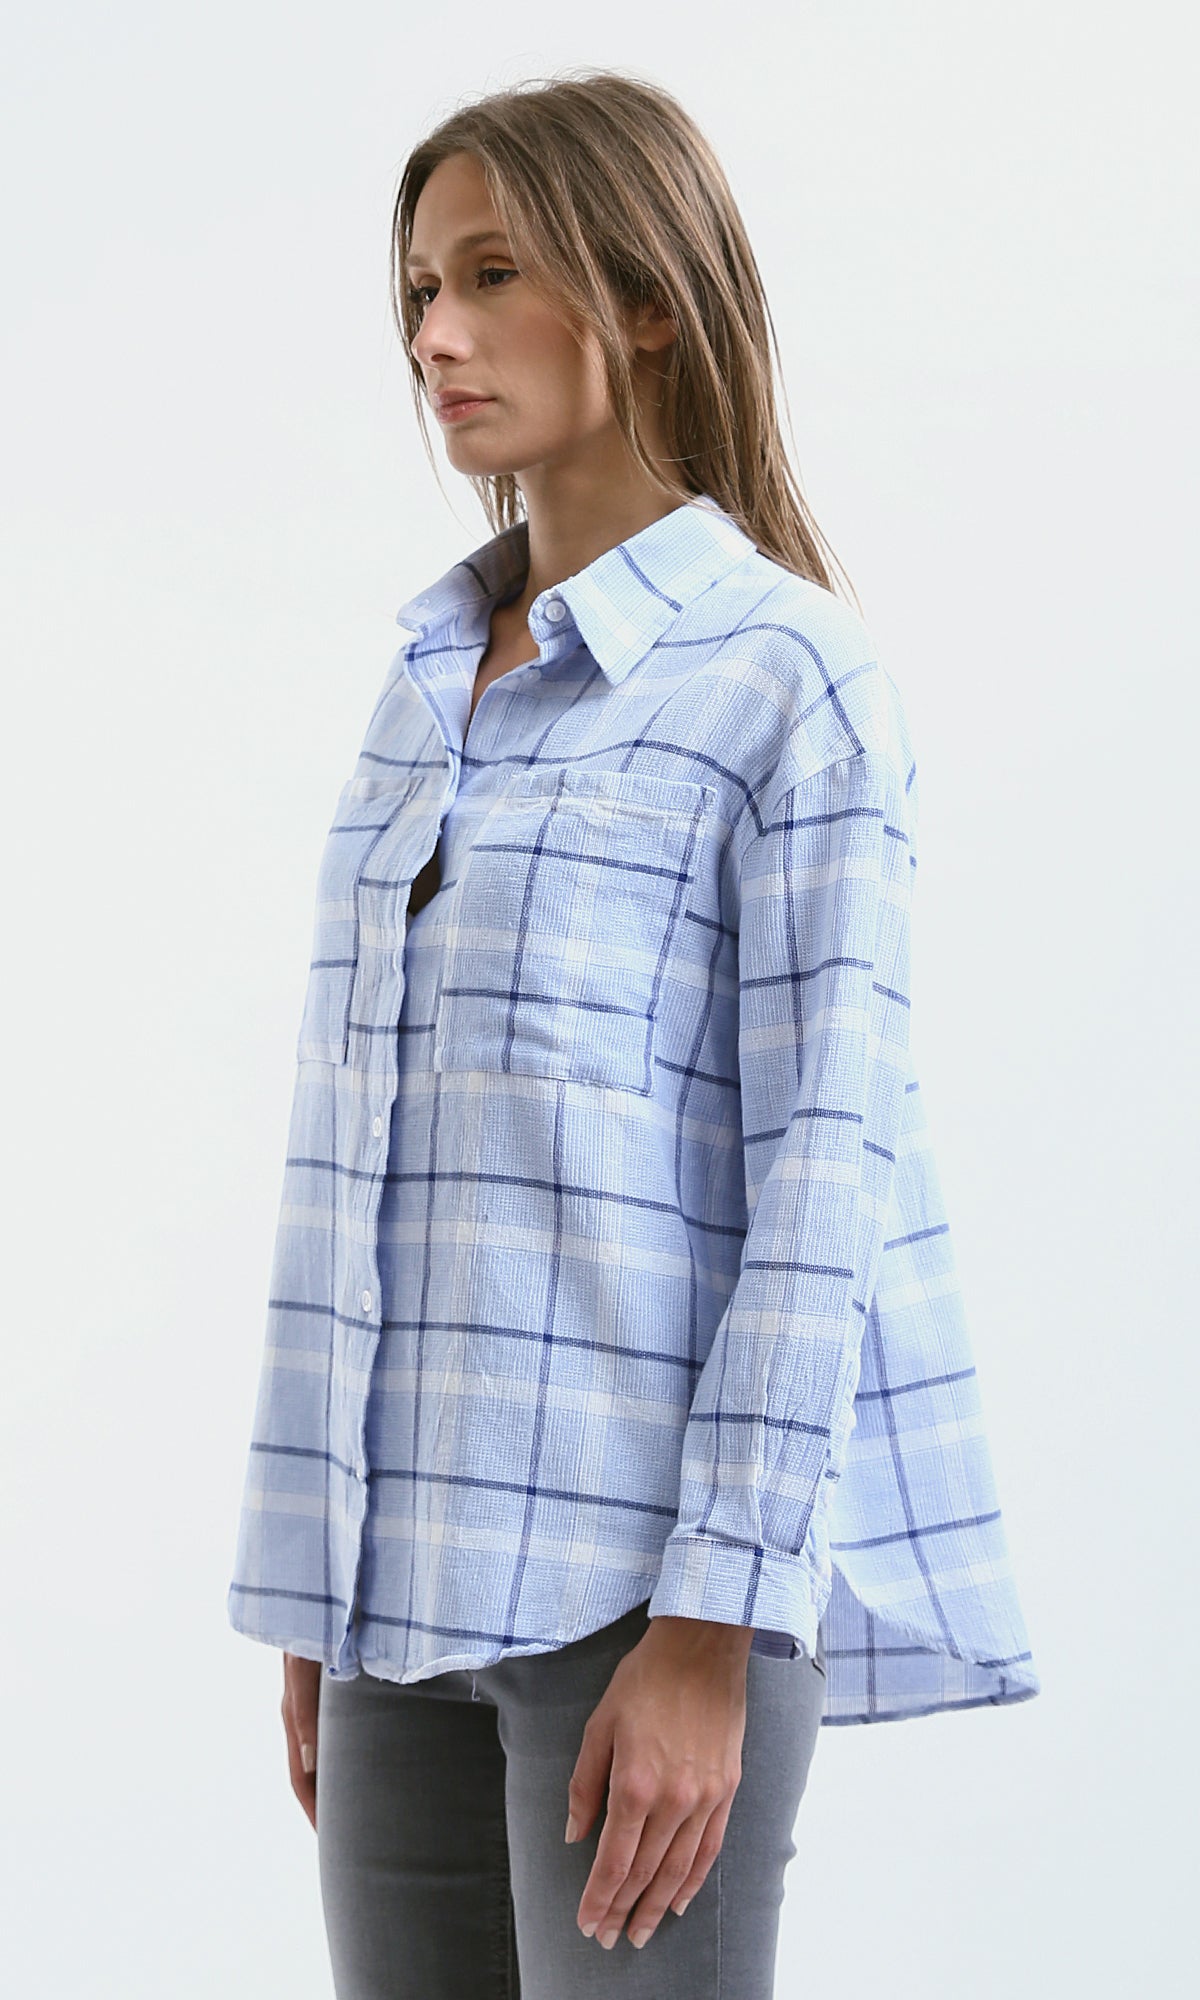 O179133 Off-White Long Sleeves Shirt With Patched Pocket